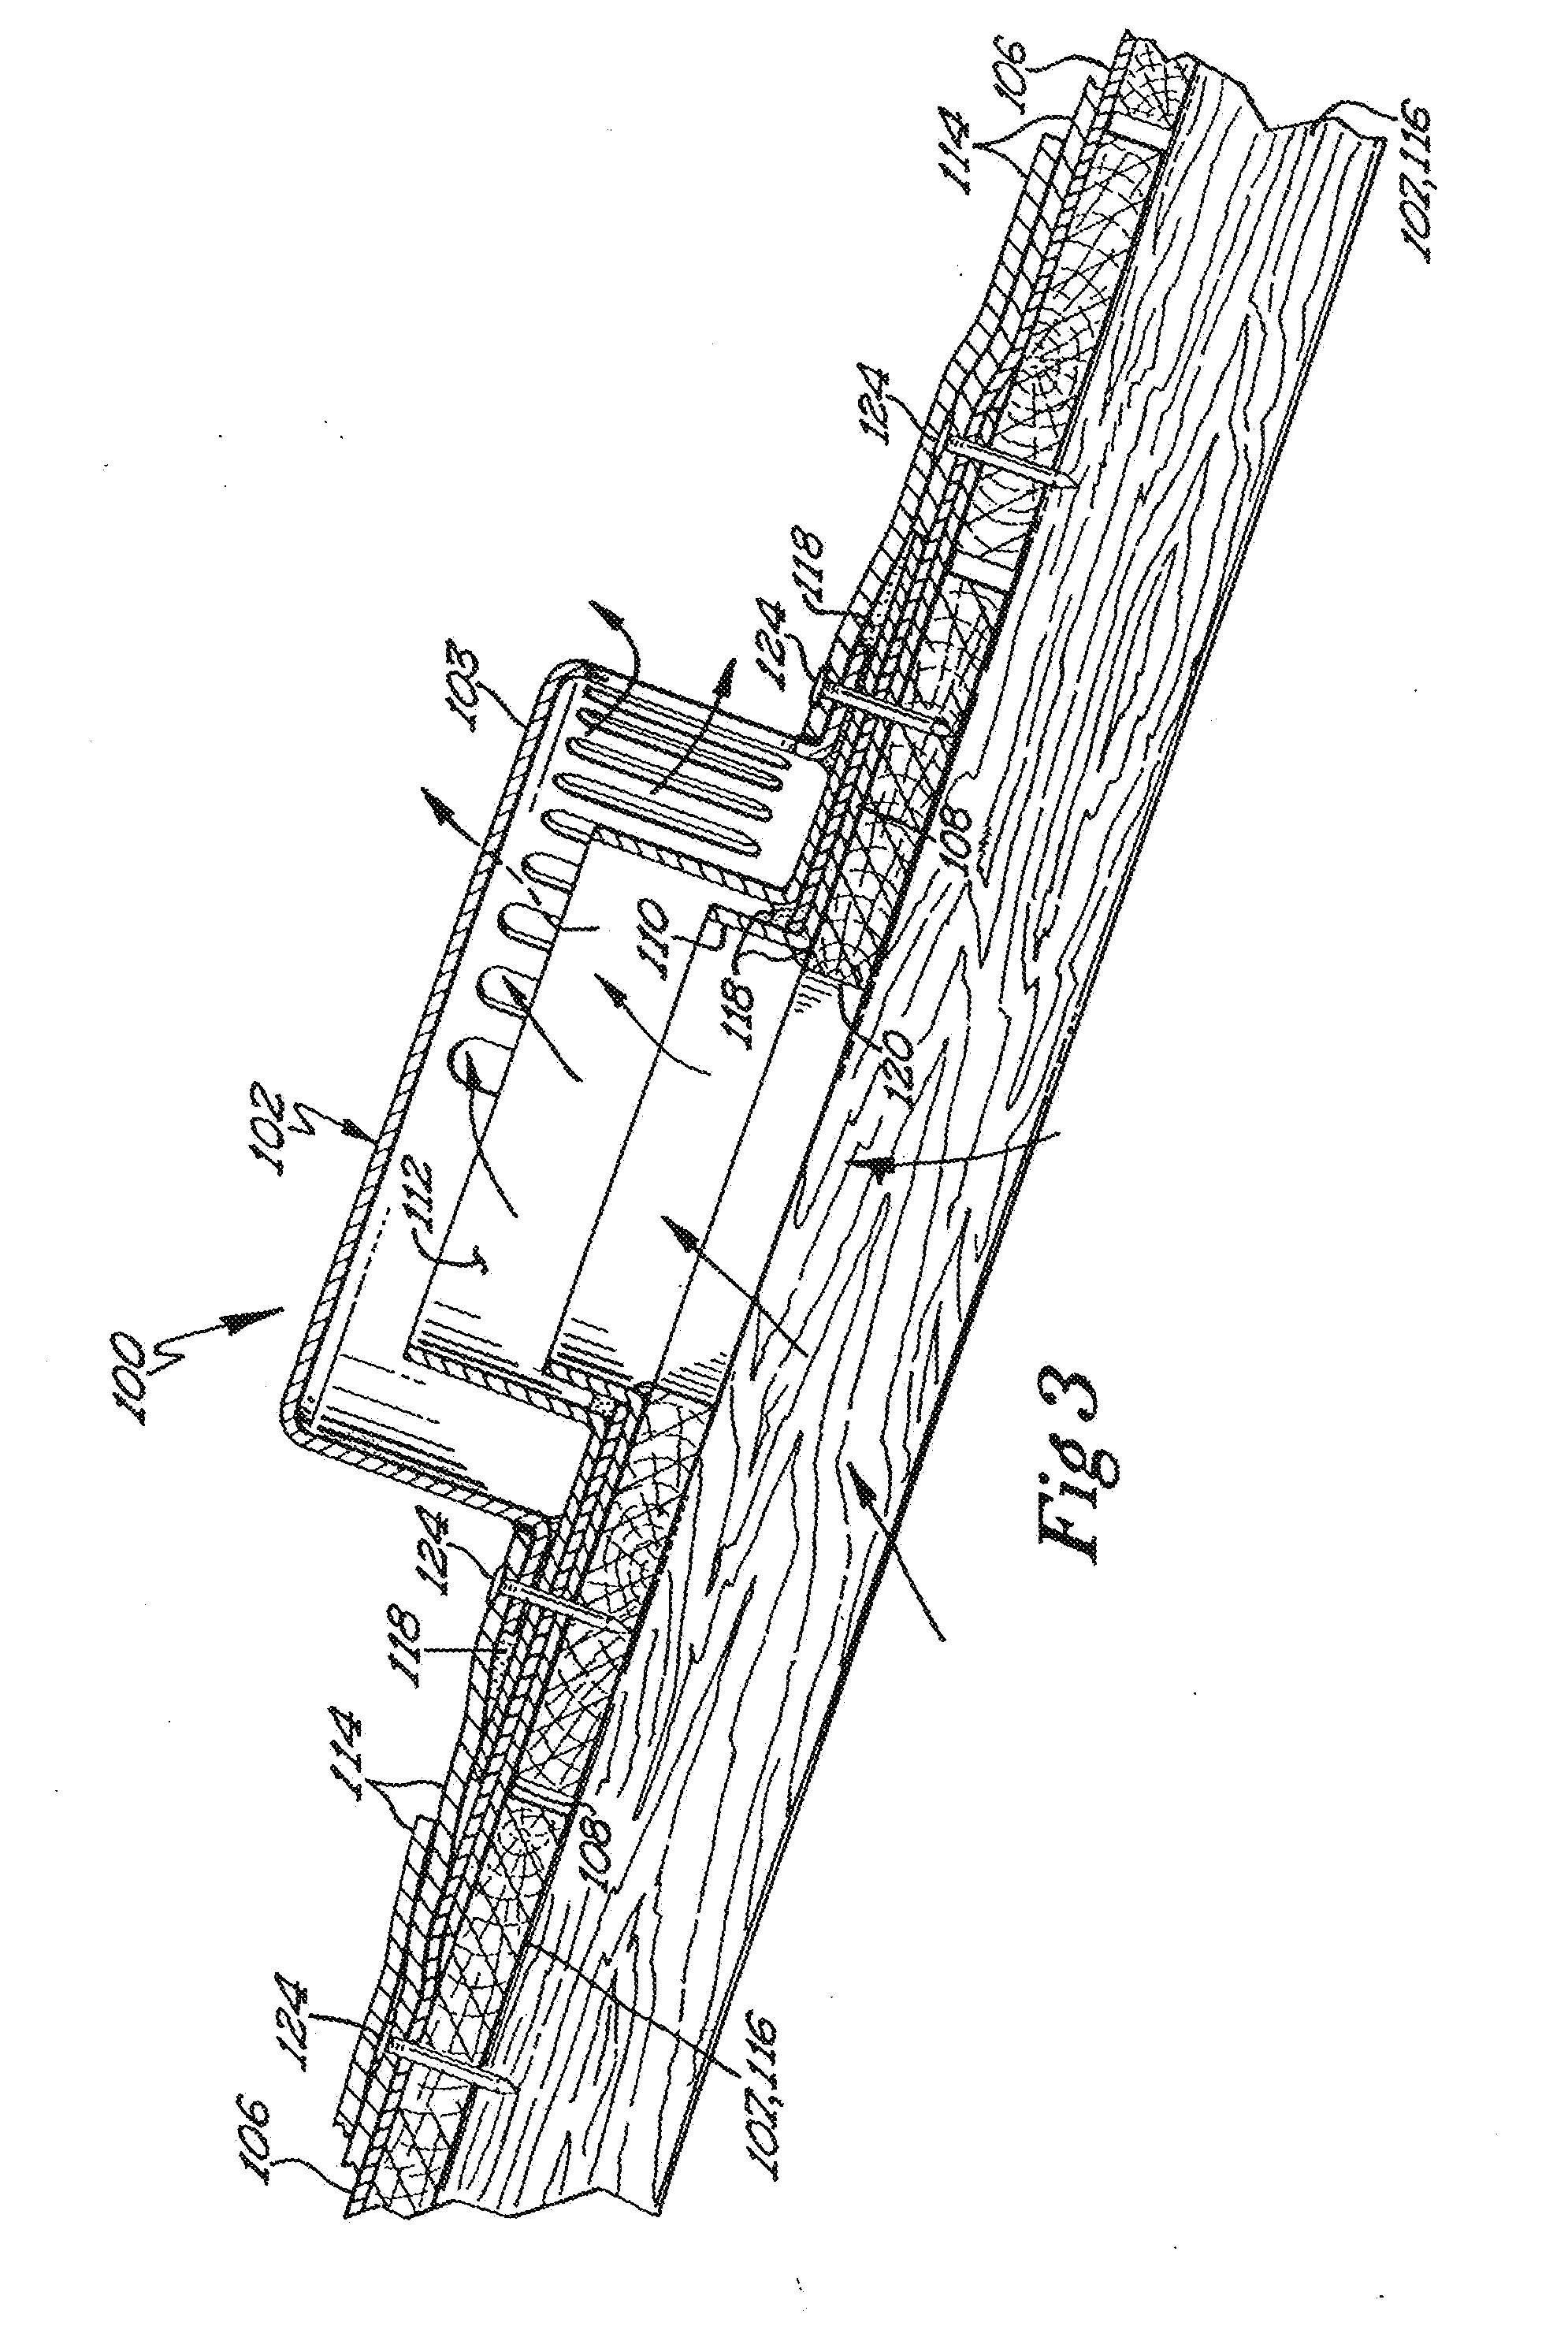 Roof vent base plate and installation methods